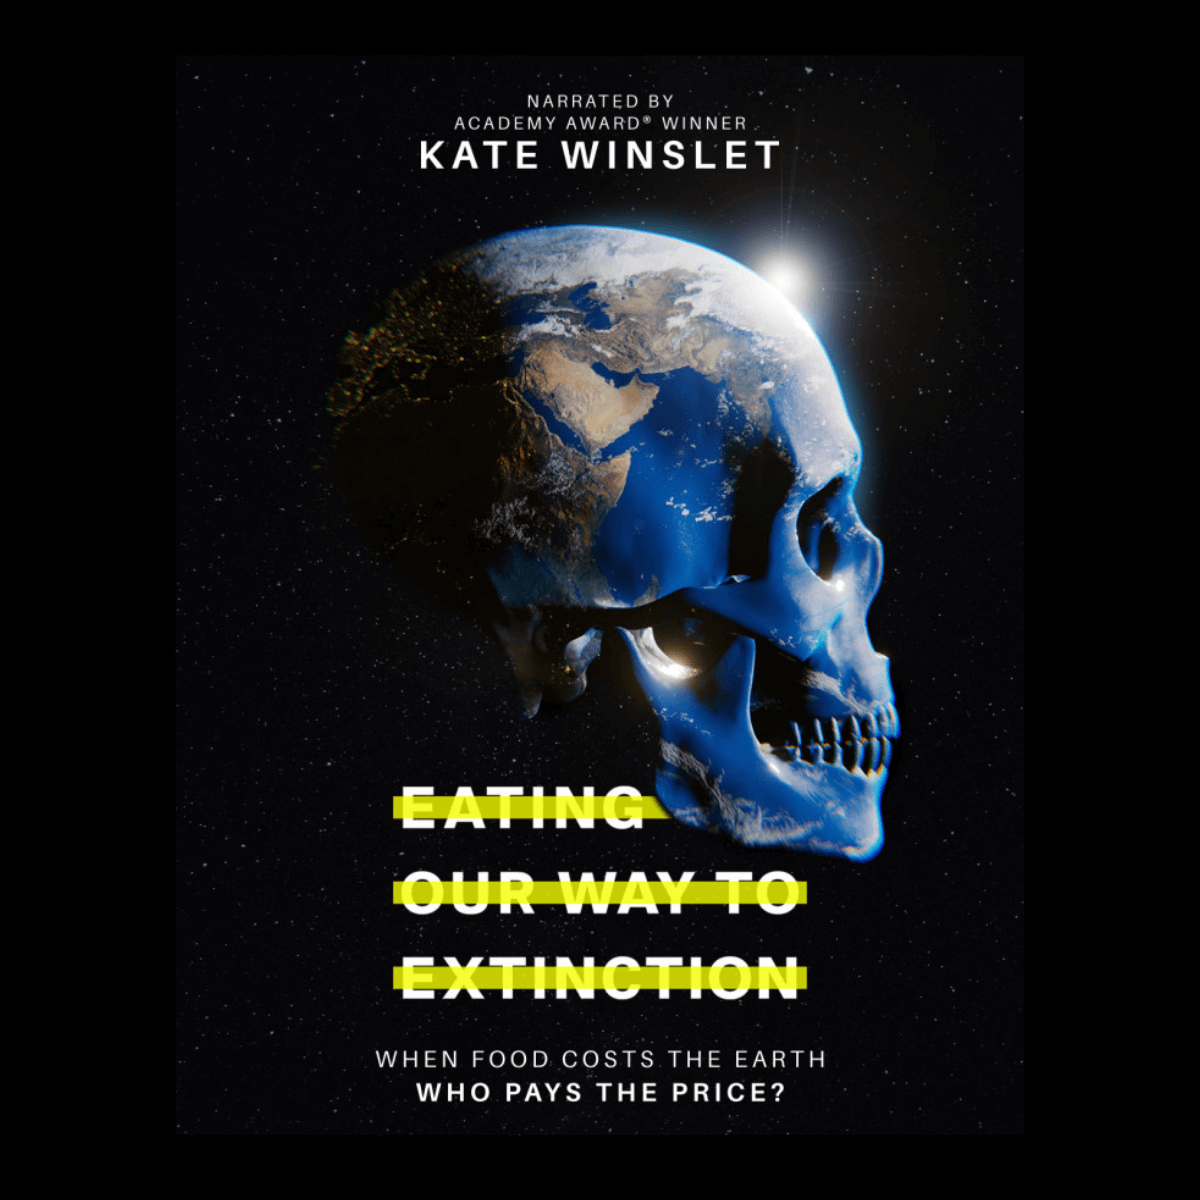 Eating our Way to Extinction - narrated by Kate Winslet - documentary poster